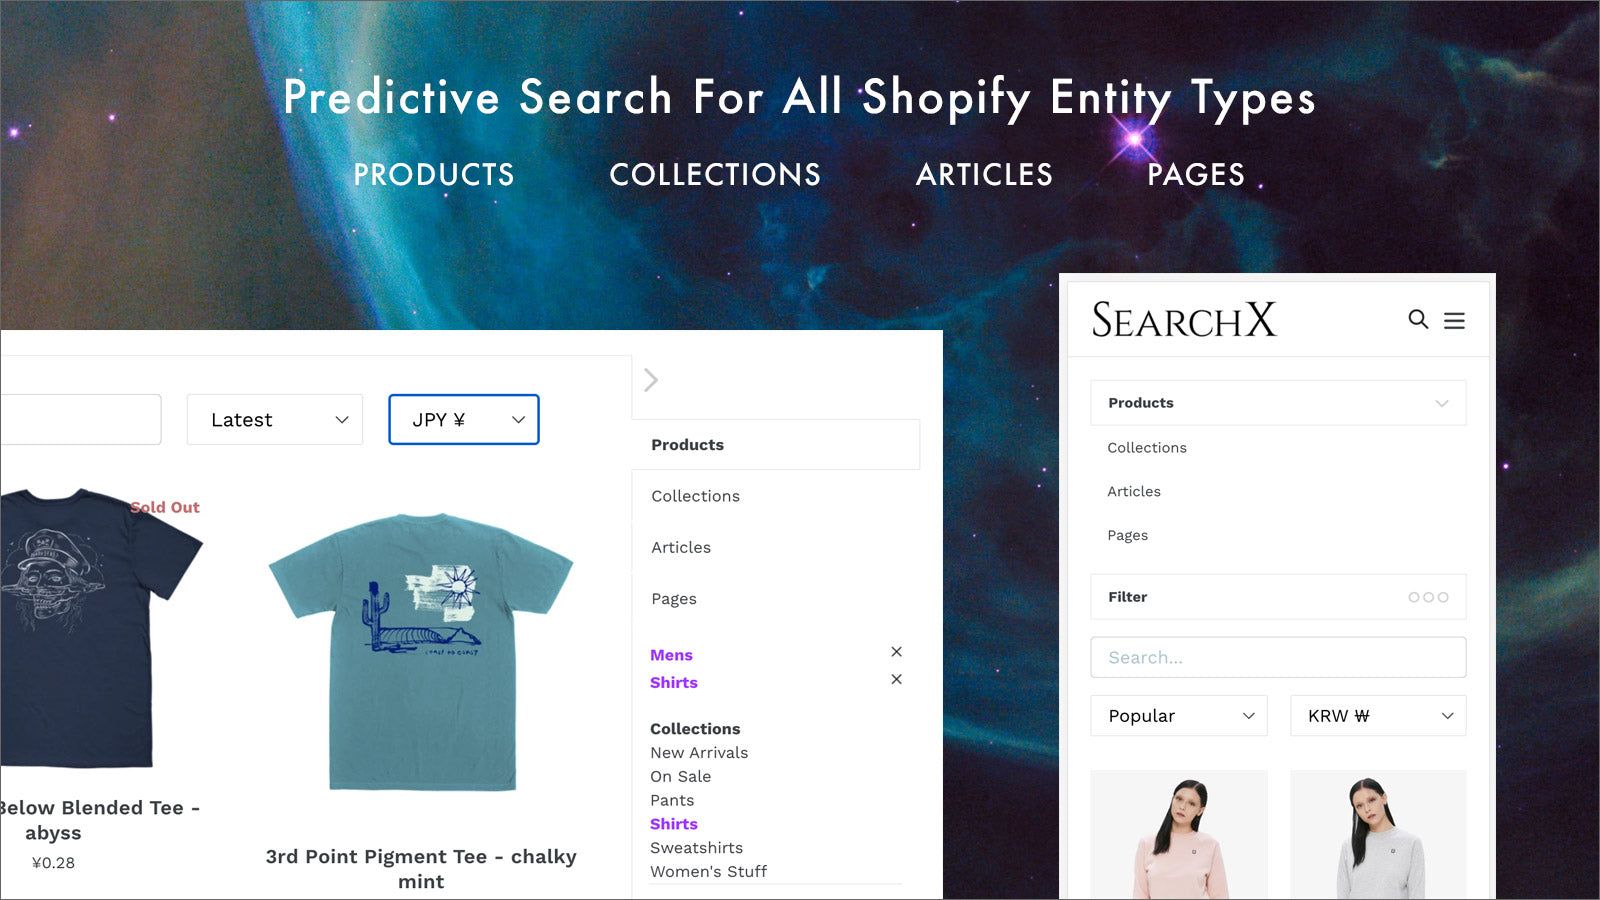 Shopify predictive search collections, articles, pages